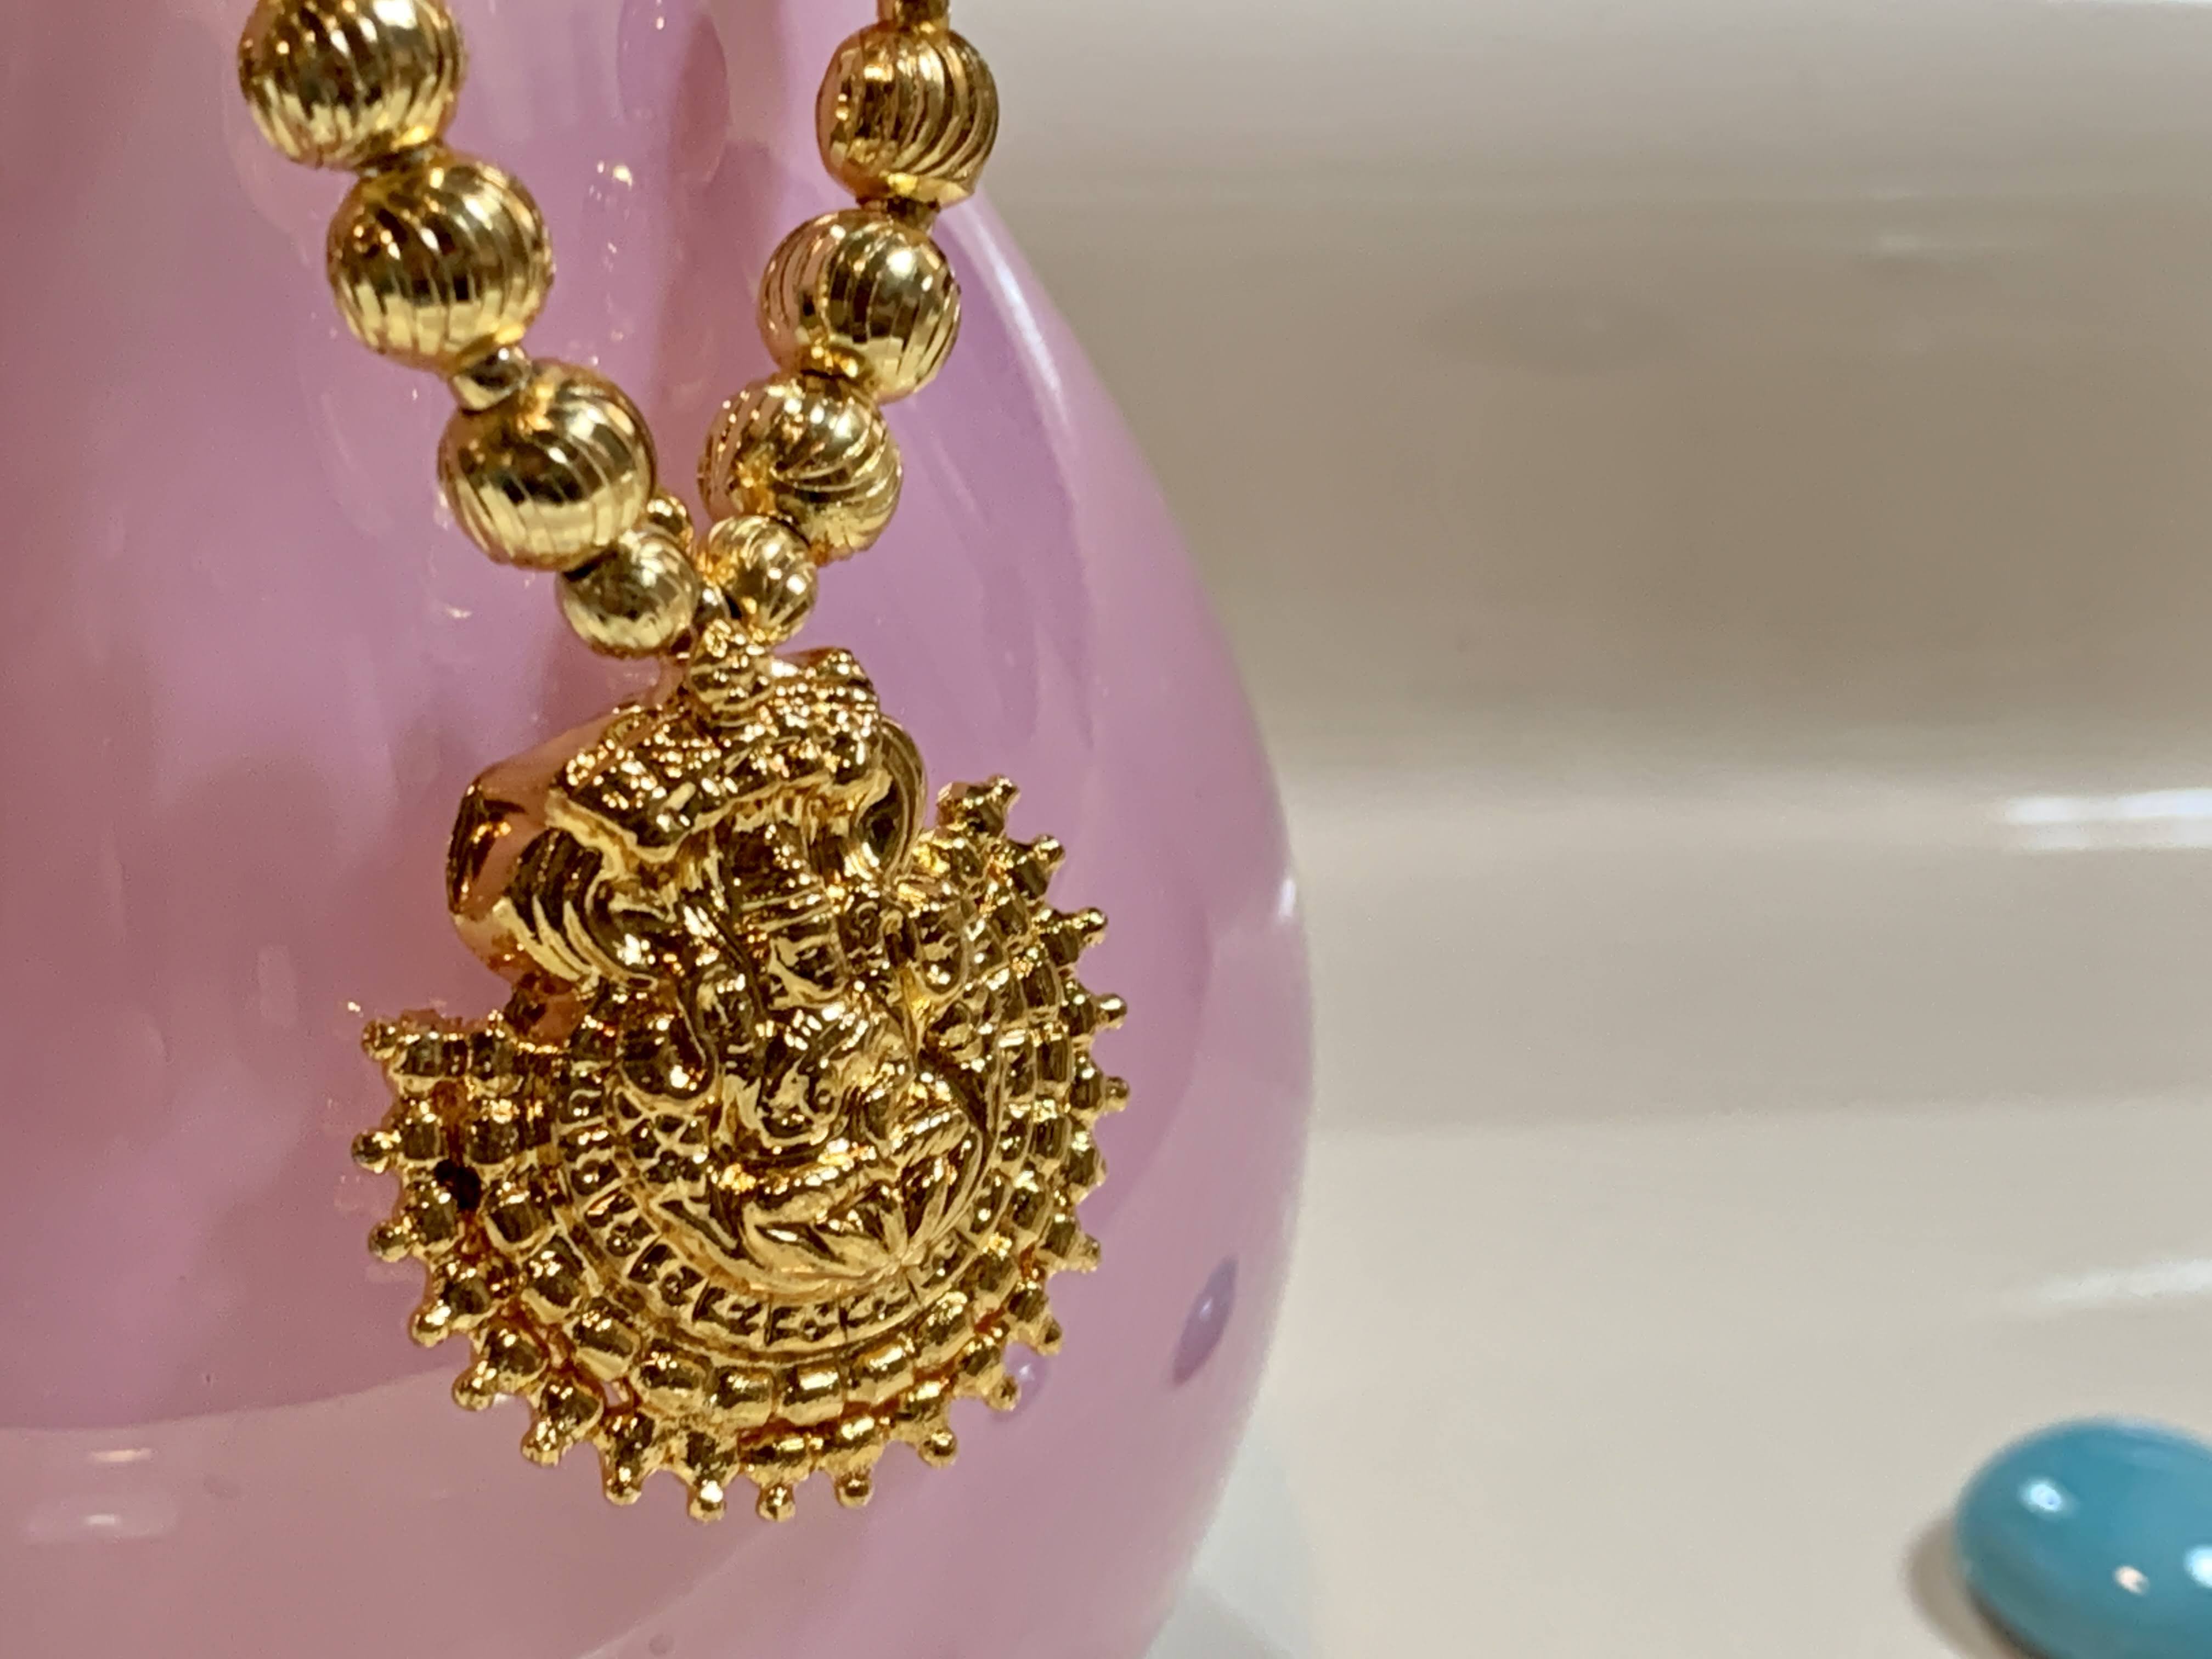 Goddess Lakshmi Pendant - Gold Plated Temple Jewelry - Shiny Gold Plated Bead Necklace